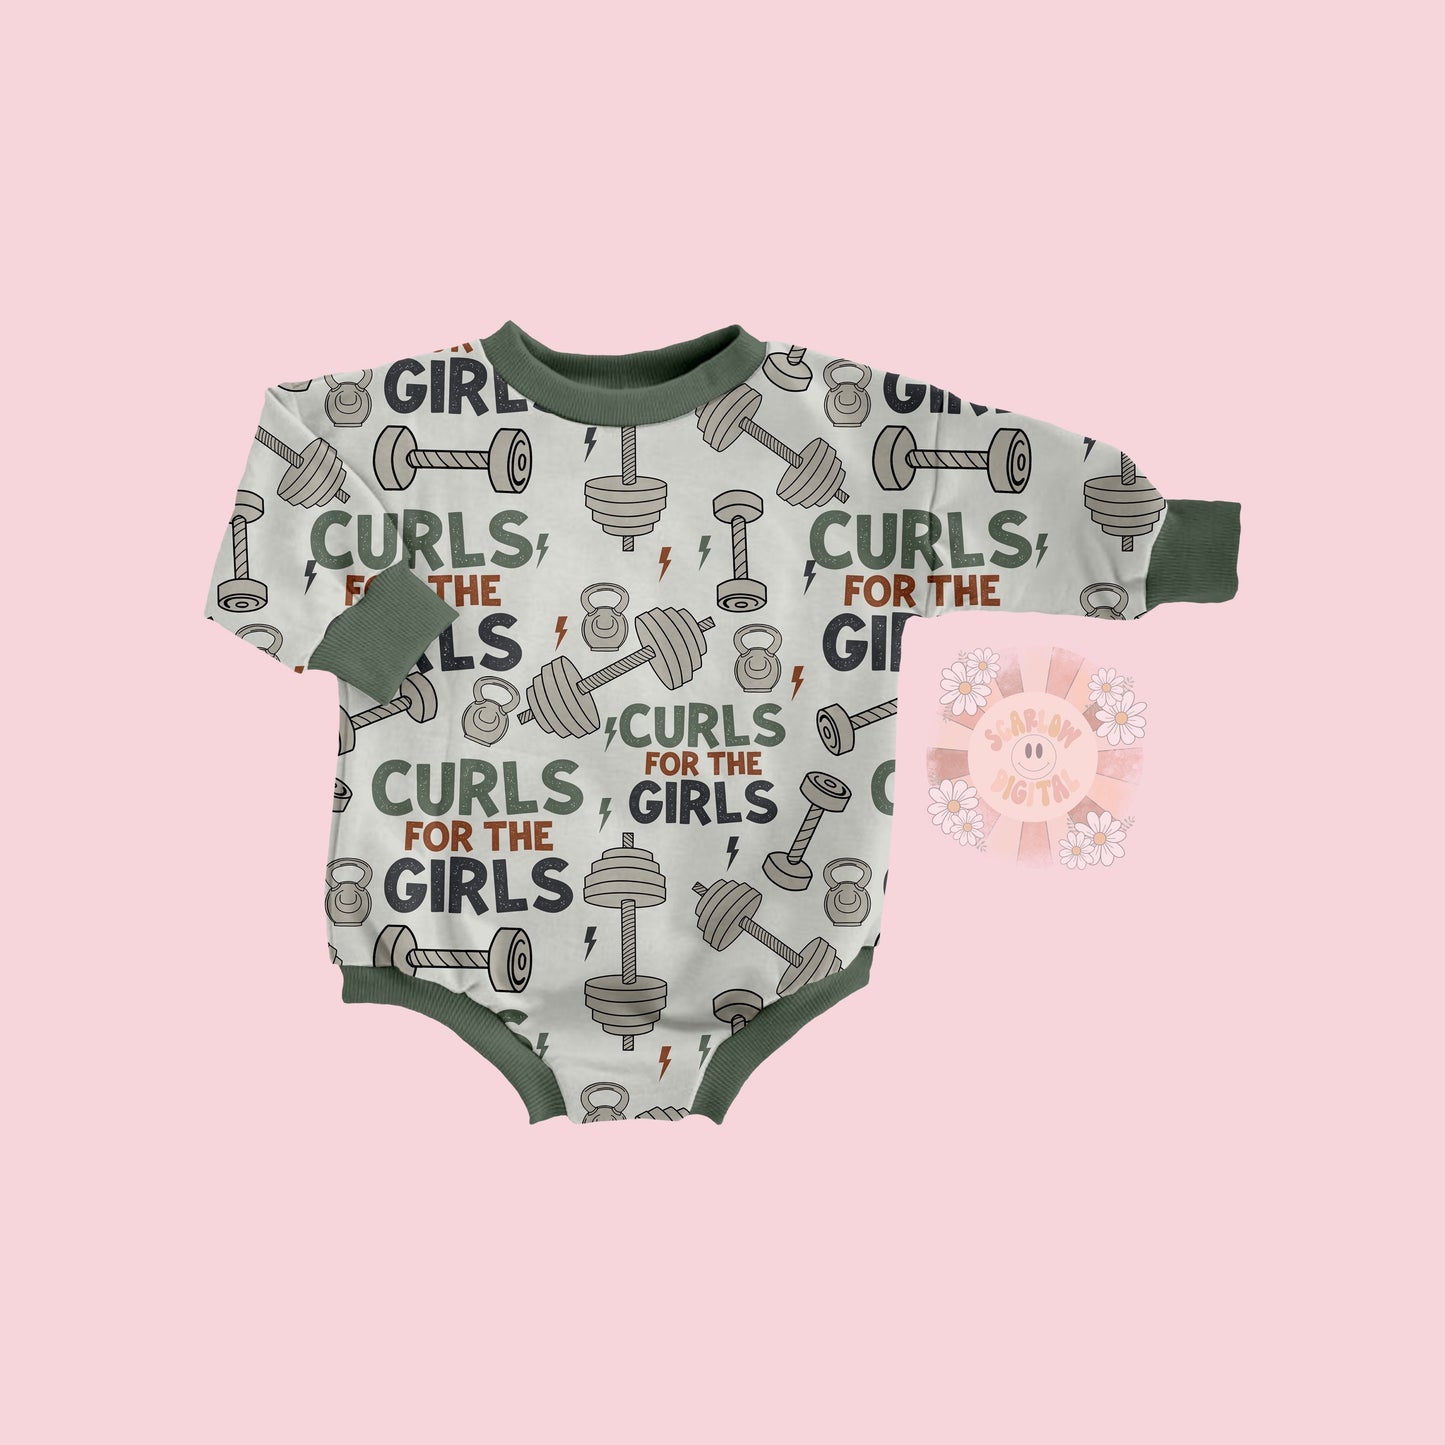 Curls For The Girls Seamless Pattern-Boy Sublimation Digital Design Download-dumbell seamless pattern, gym sublimation, little boy designs